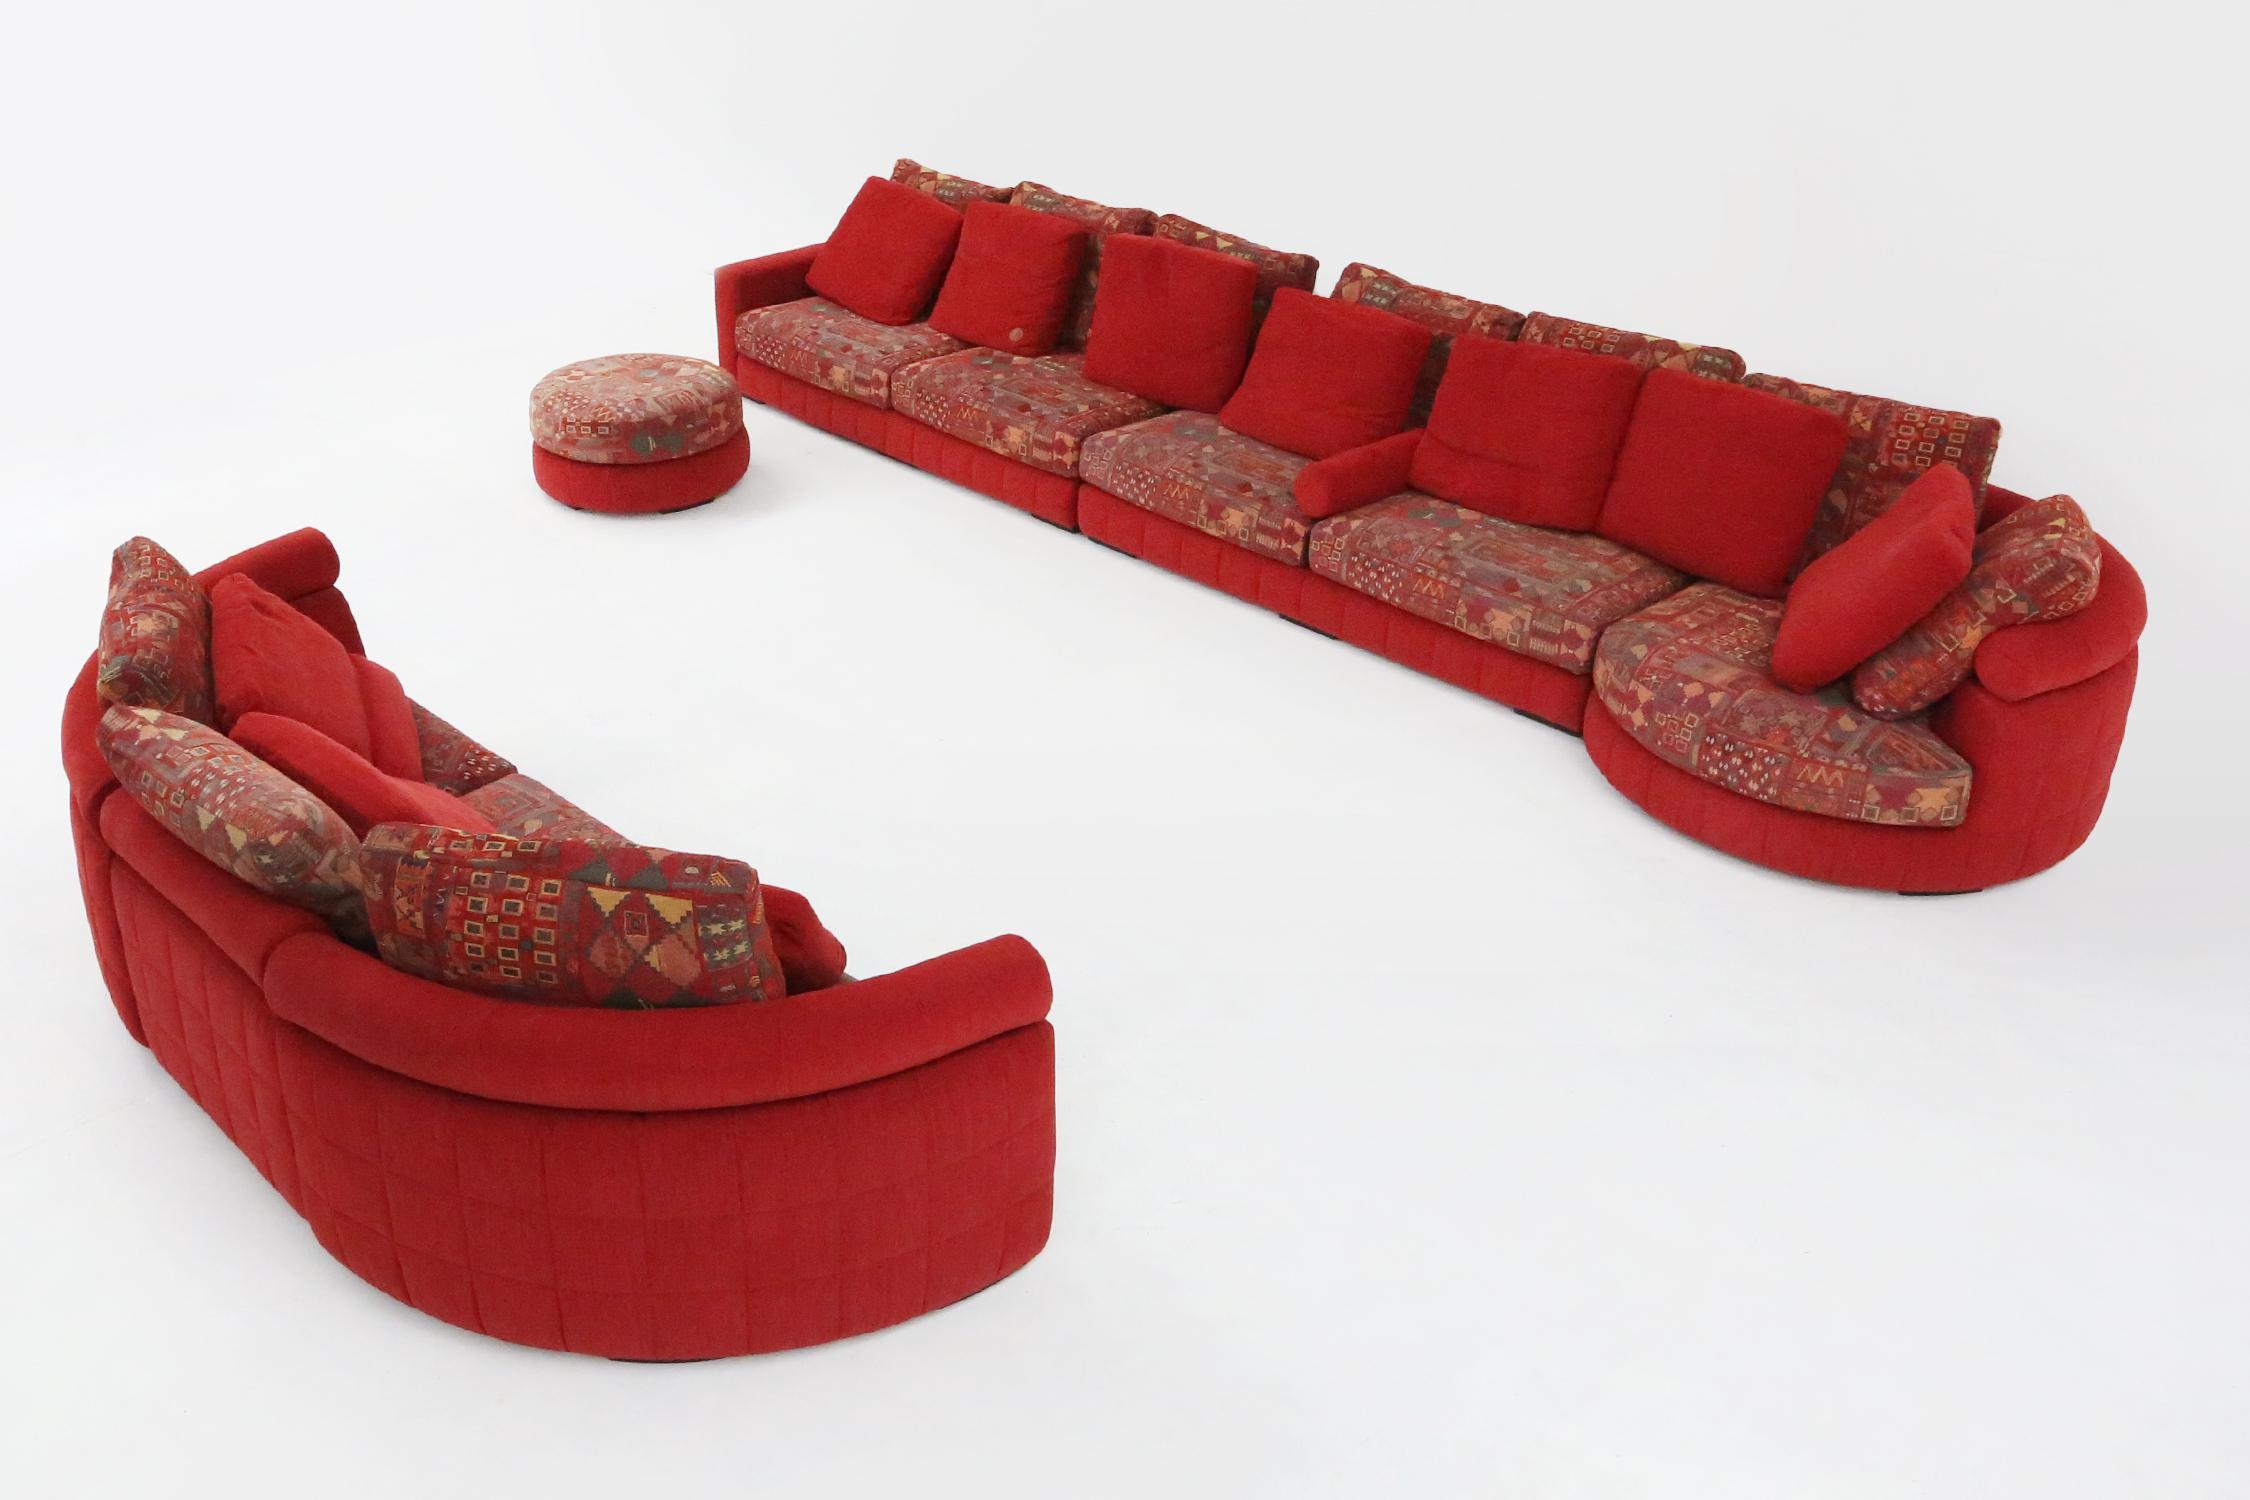 French Roche Bobois modular sofa in red and patterned upholstery 1980 For Sale